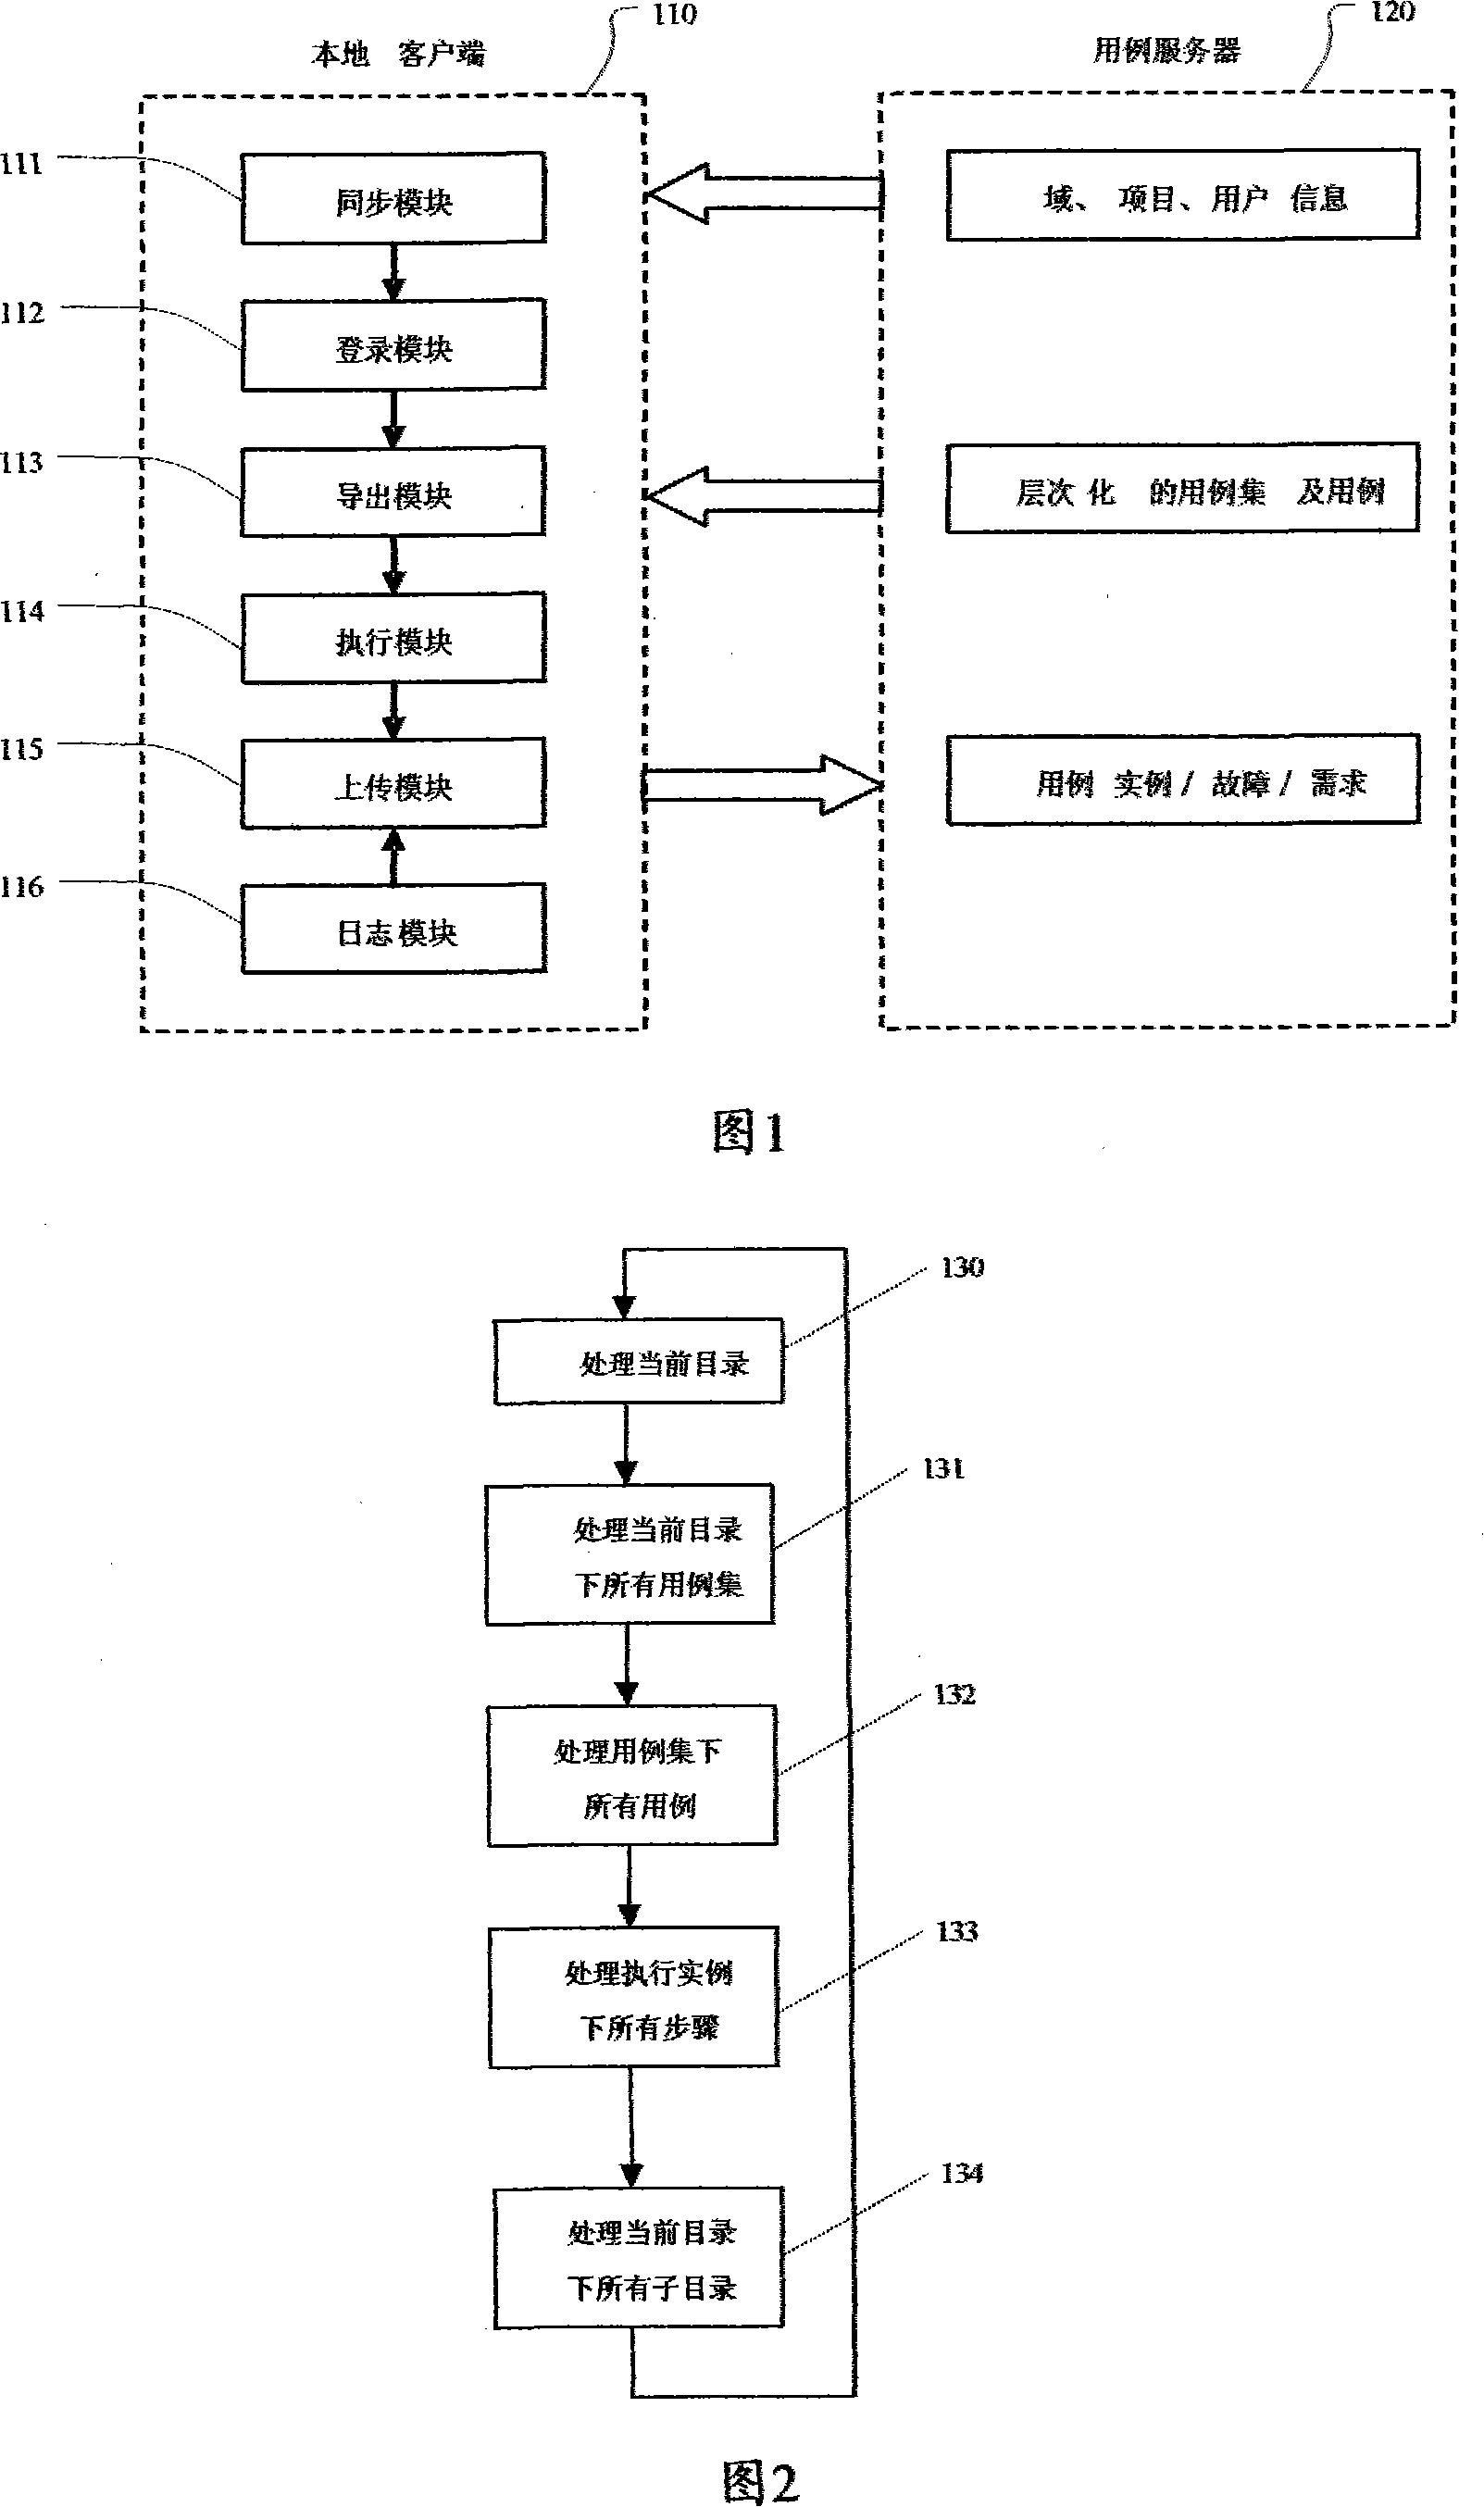 Off-lining test execution constructing method and apparatus